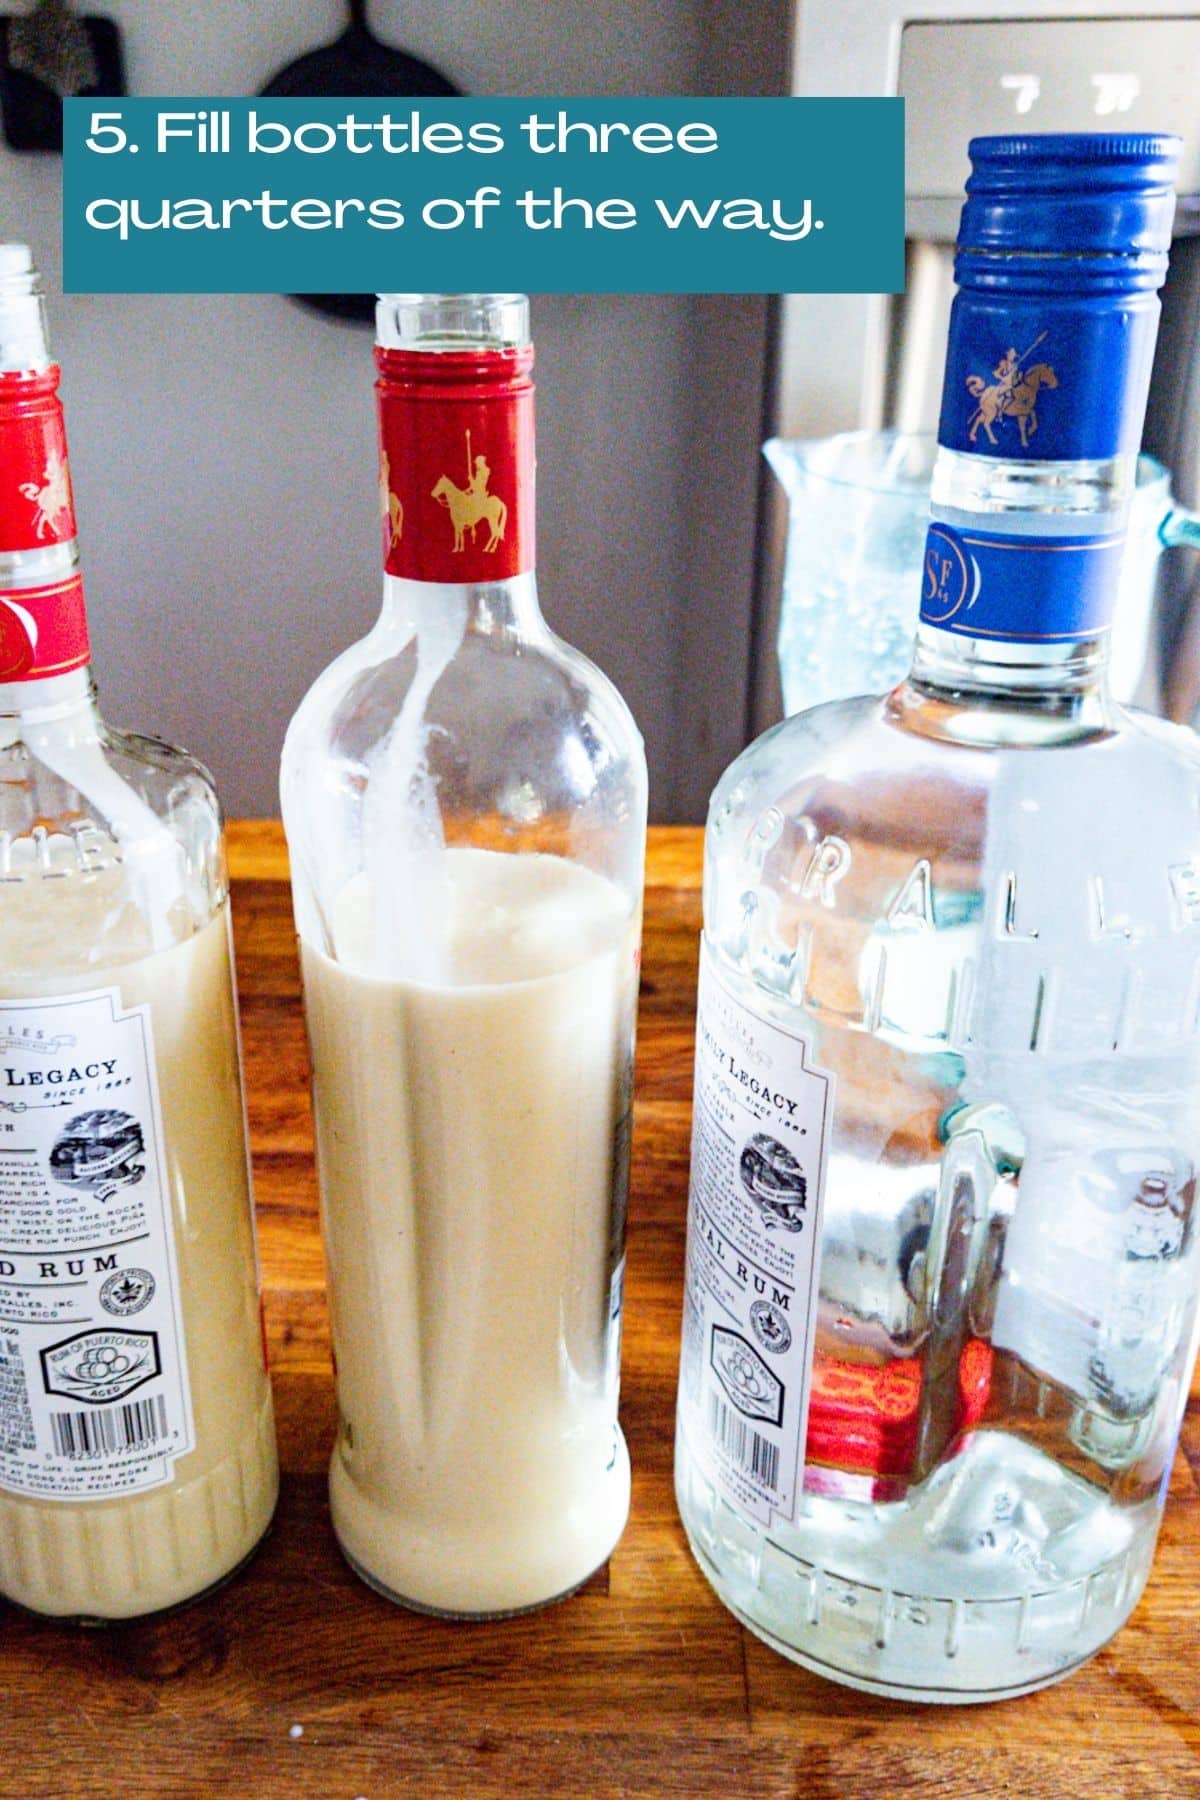 Coquito mix poured into two bottles and a bottle of white rum next to them